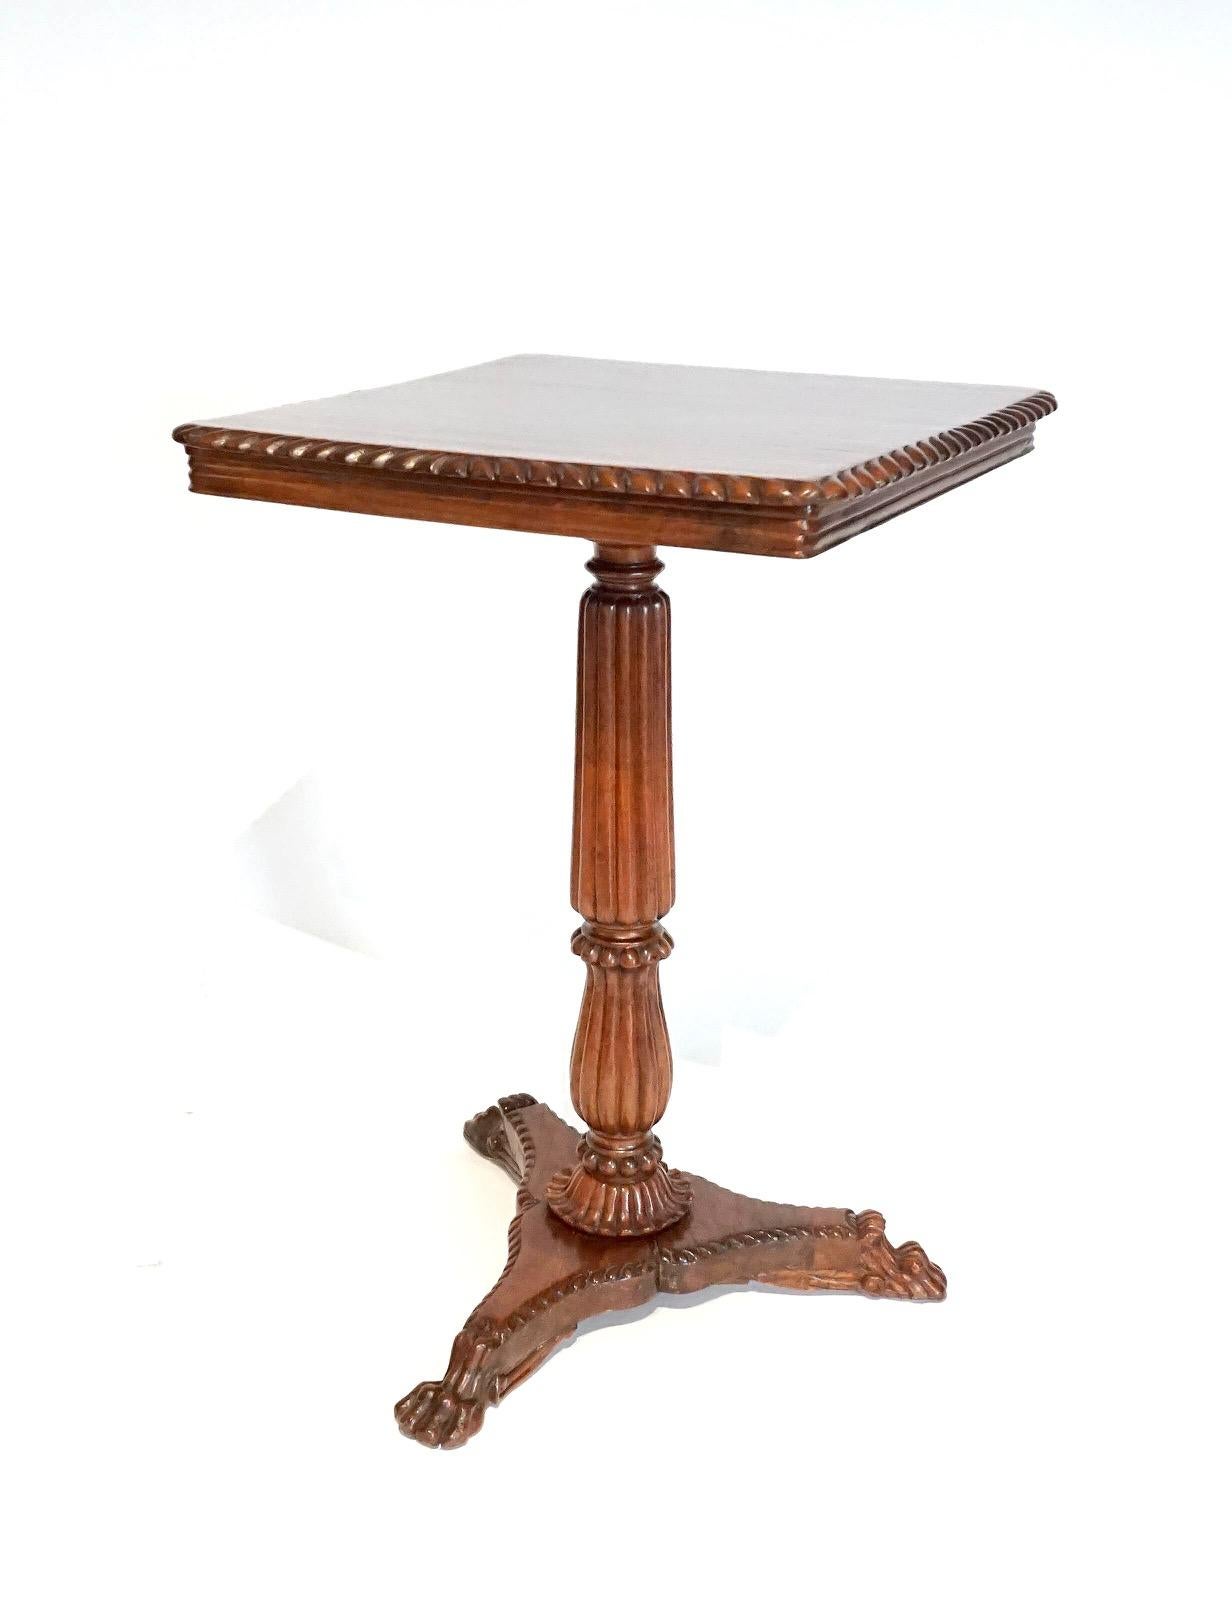 Circa 1835 Anglo-Indian Regency style solid mahogany occasional table or stand having square tilting top with gadrooned edge on reed-carved and turned pedestal on tripart cusped-concave platform base ending in winged lion's paw feet. Top measures